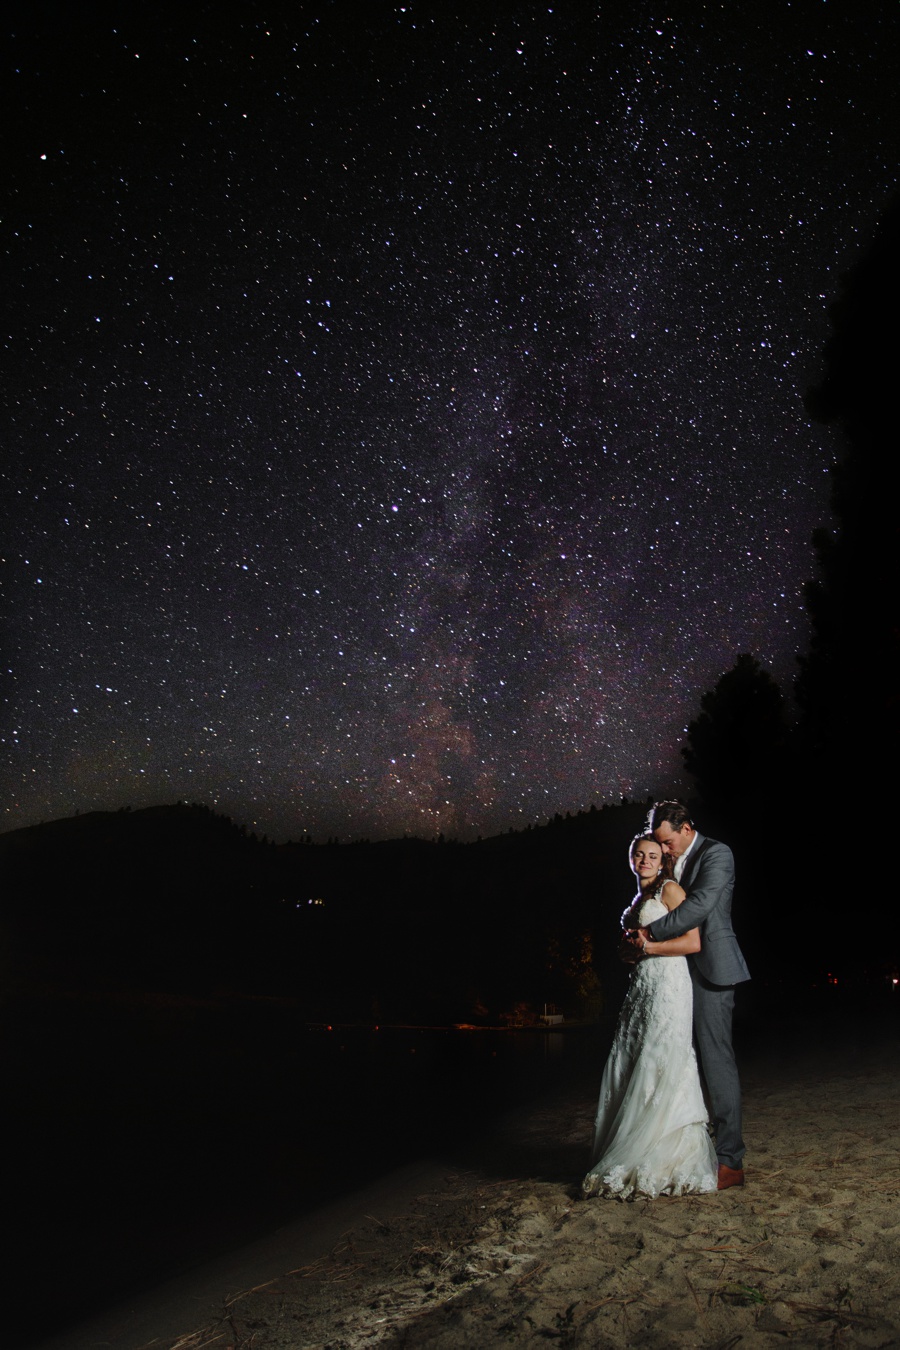 Penticton Bride and Groom with Milky Way